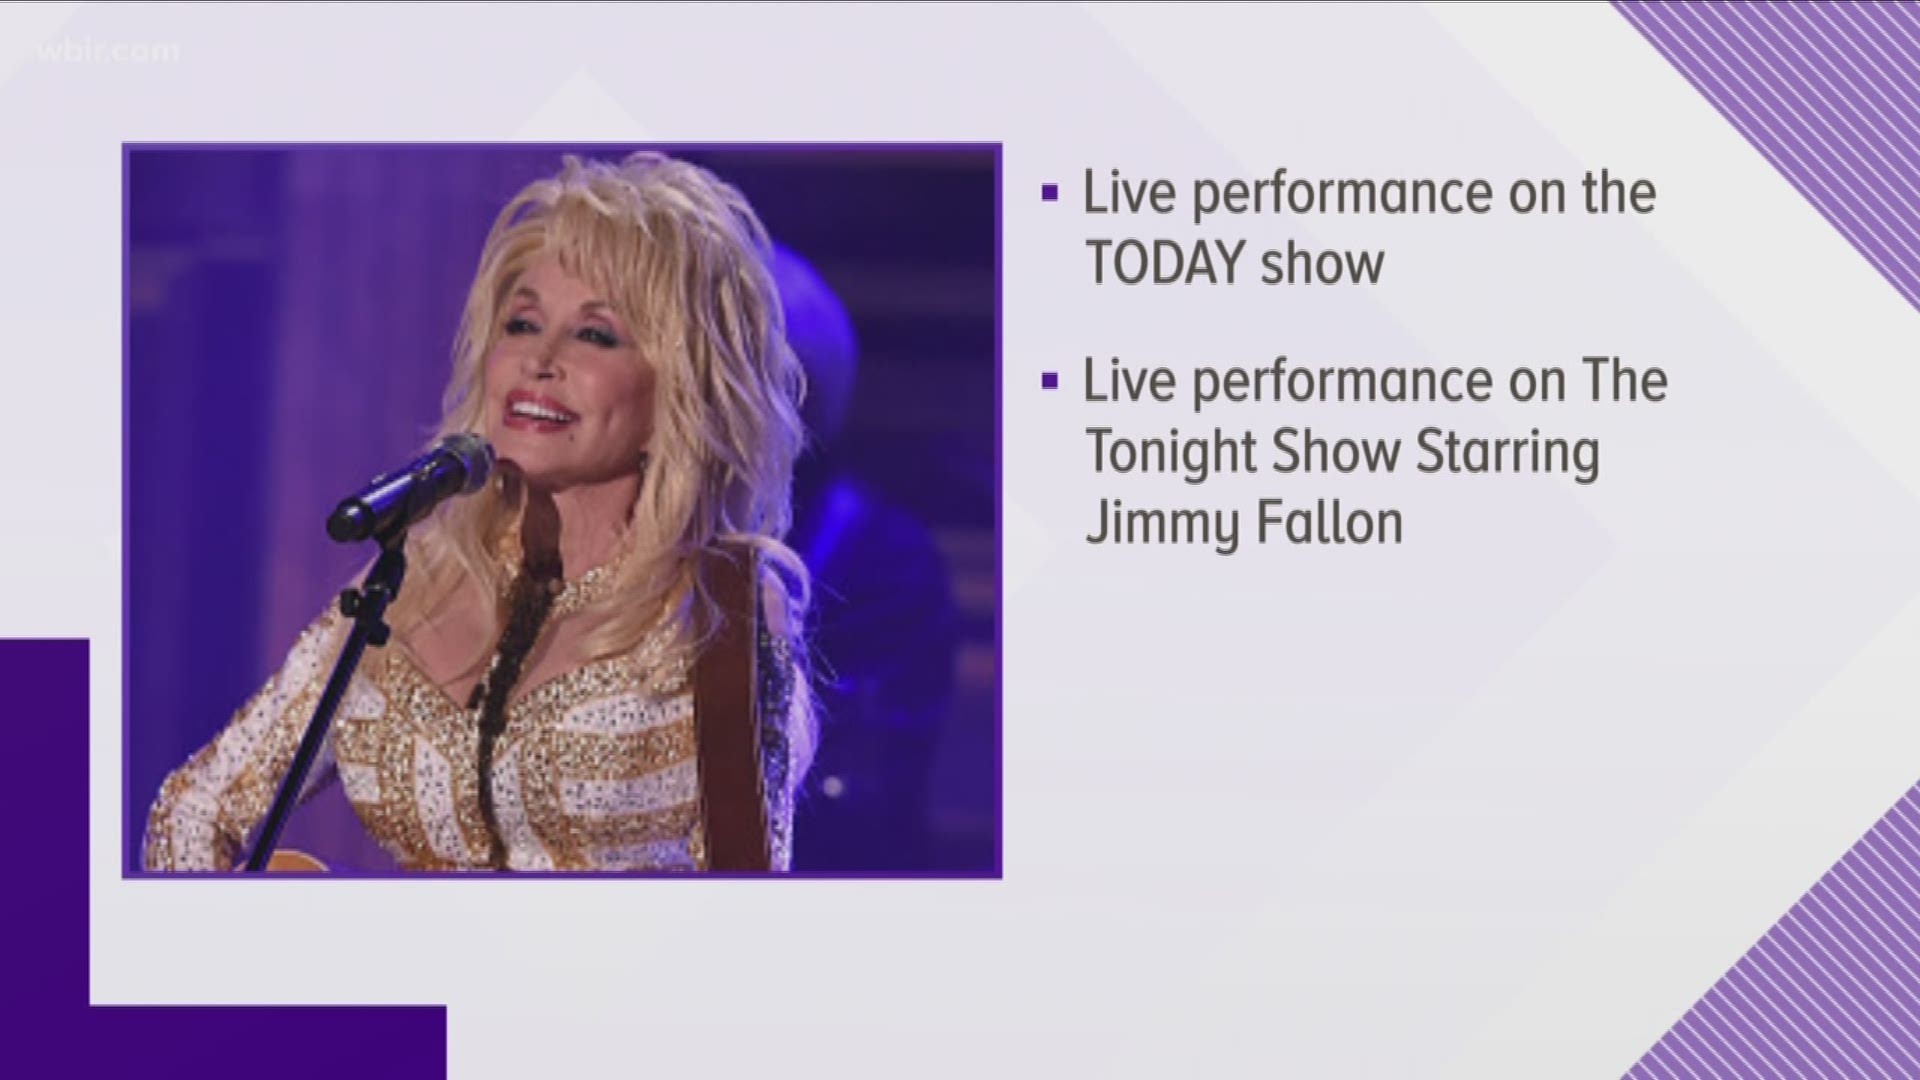 Dolly will first perform live on the Today show tomorrow morning.